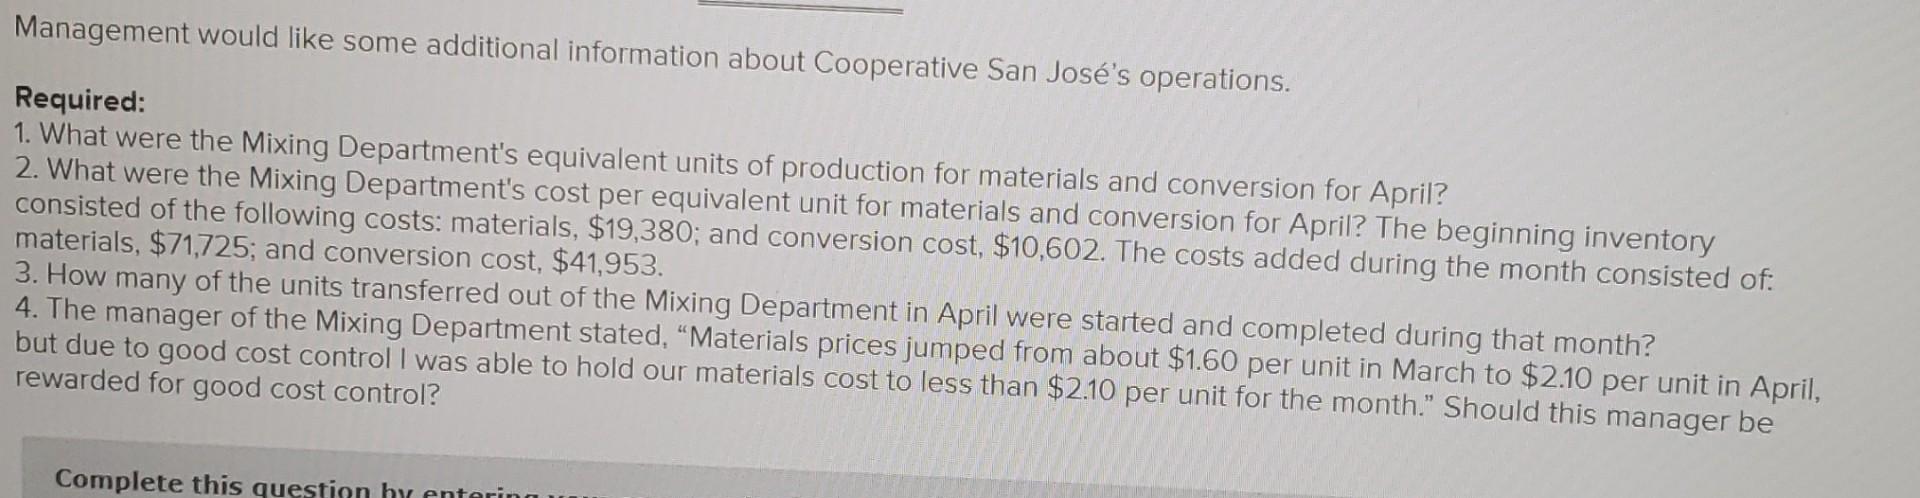 Management would like some additional information about Cooperative San Jos?s operations.Required:1. What were the Mixing